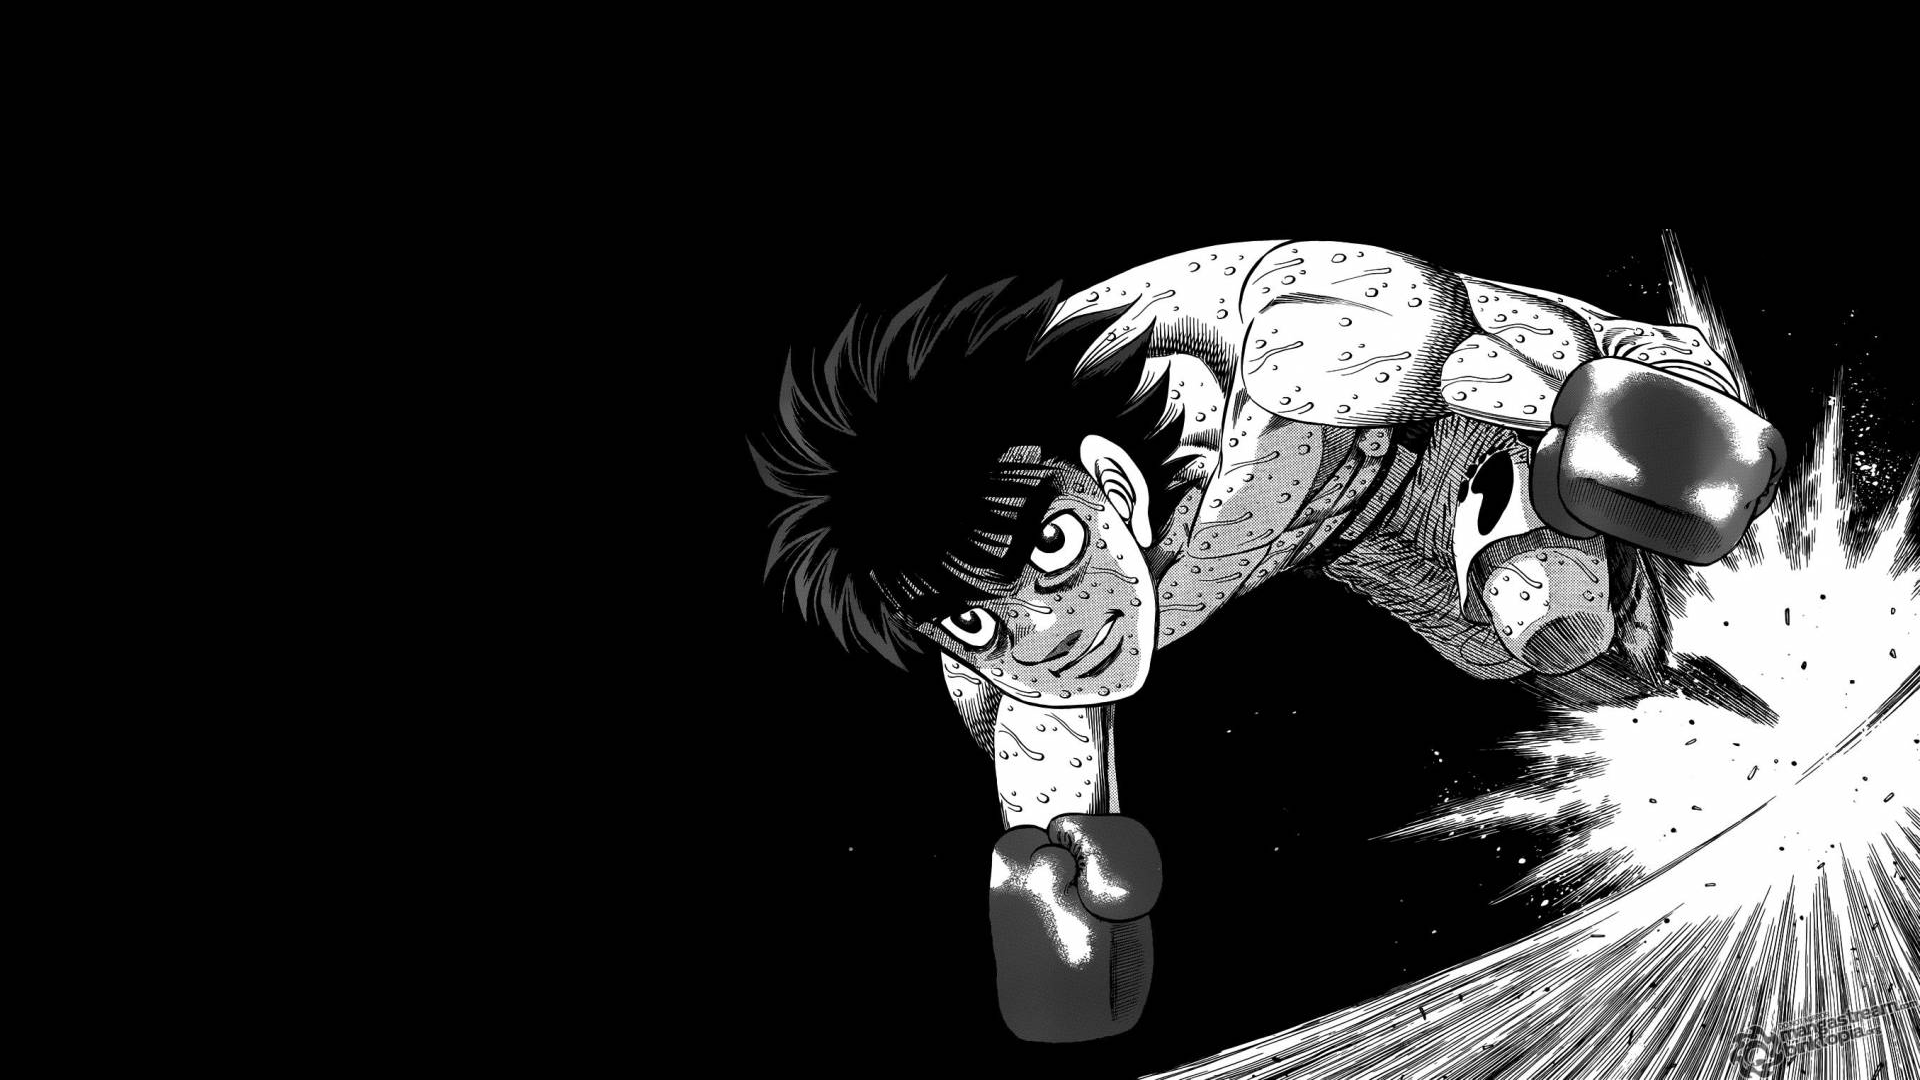 Which is better - Hajime no Ippo Manga or Anime?